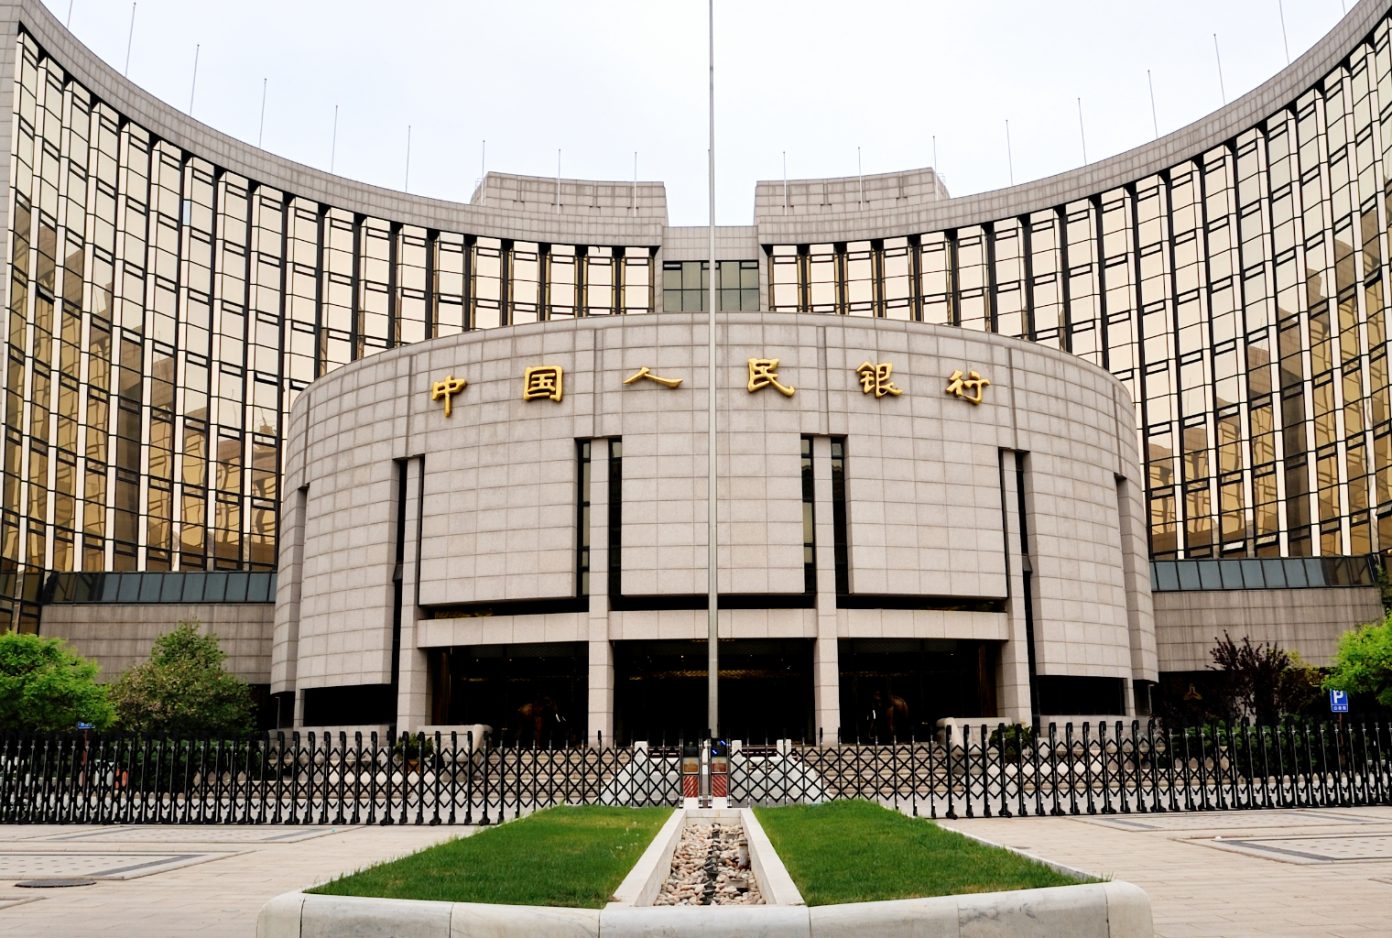 84 PBOC Digital Currency Patents Show the Extent of China ...